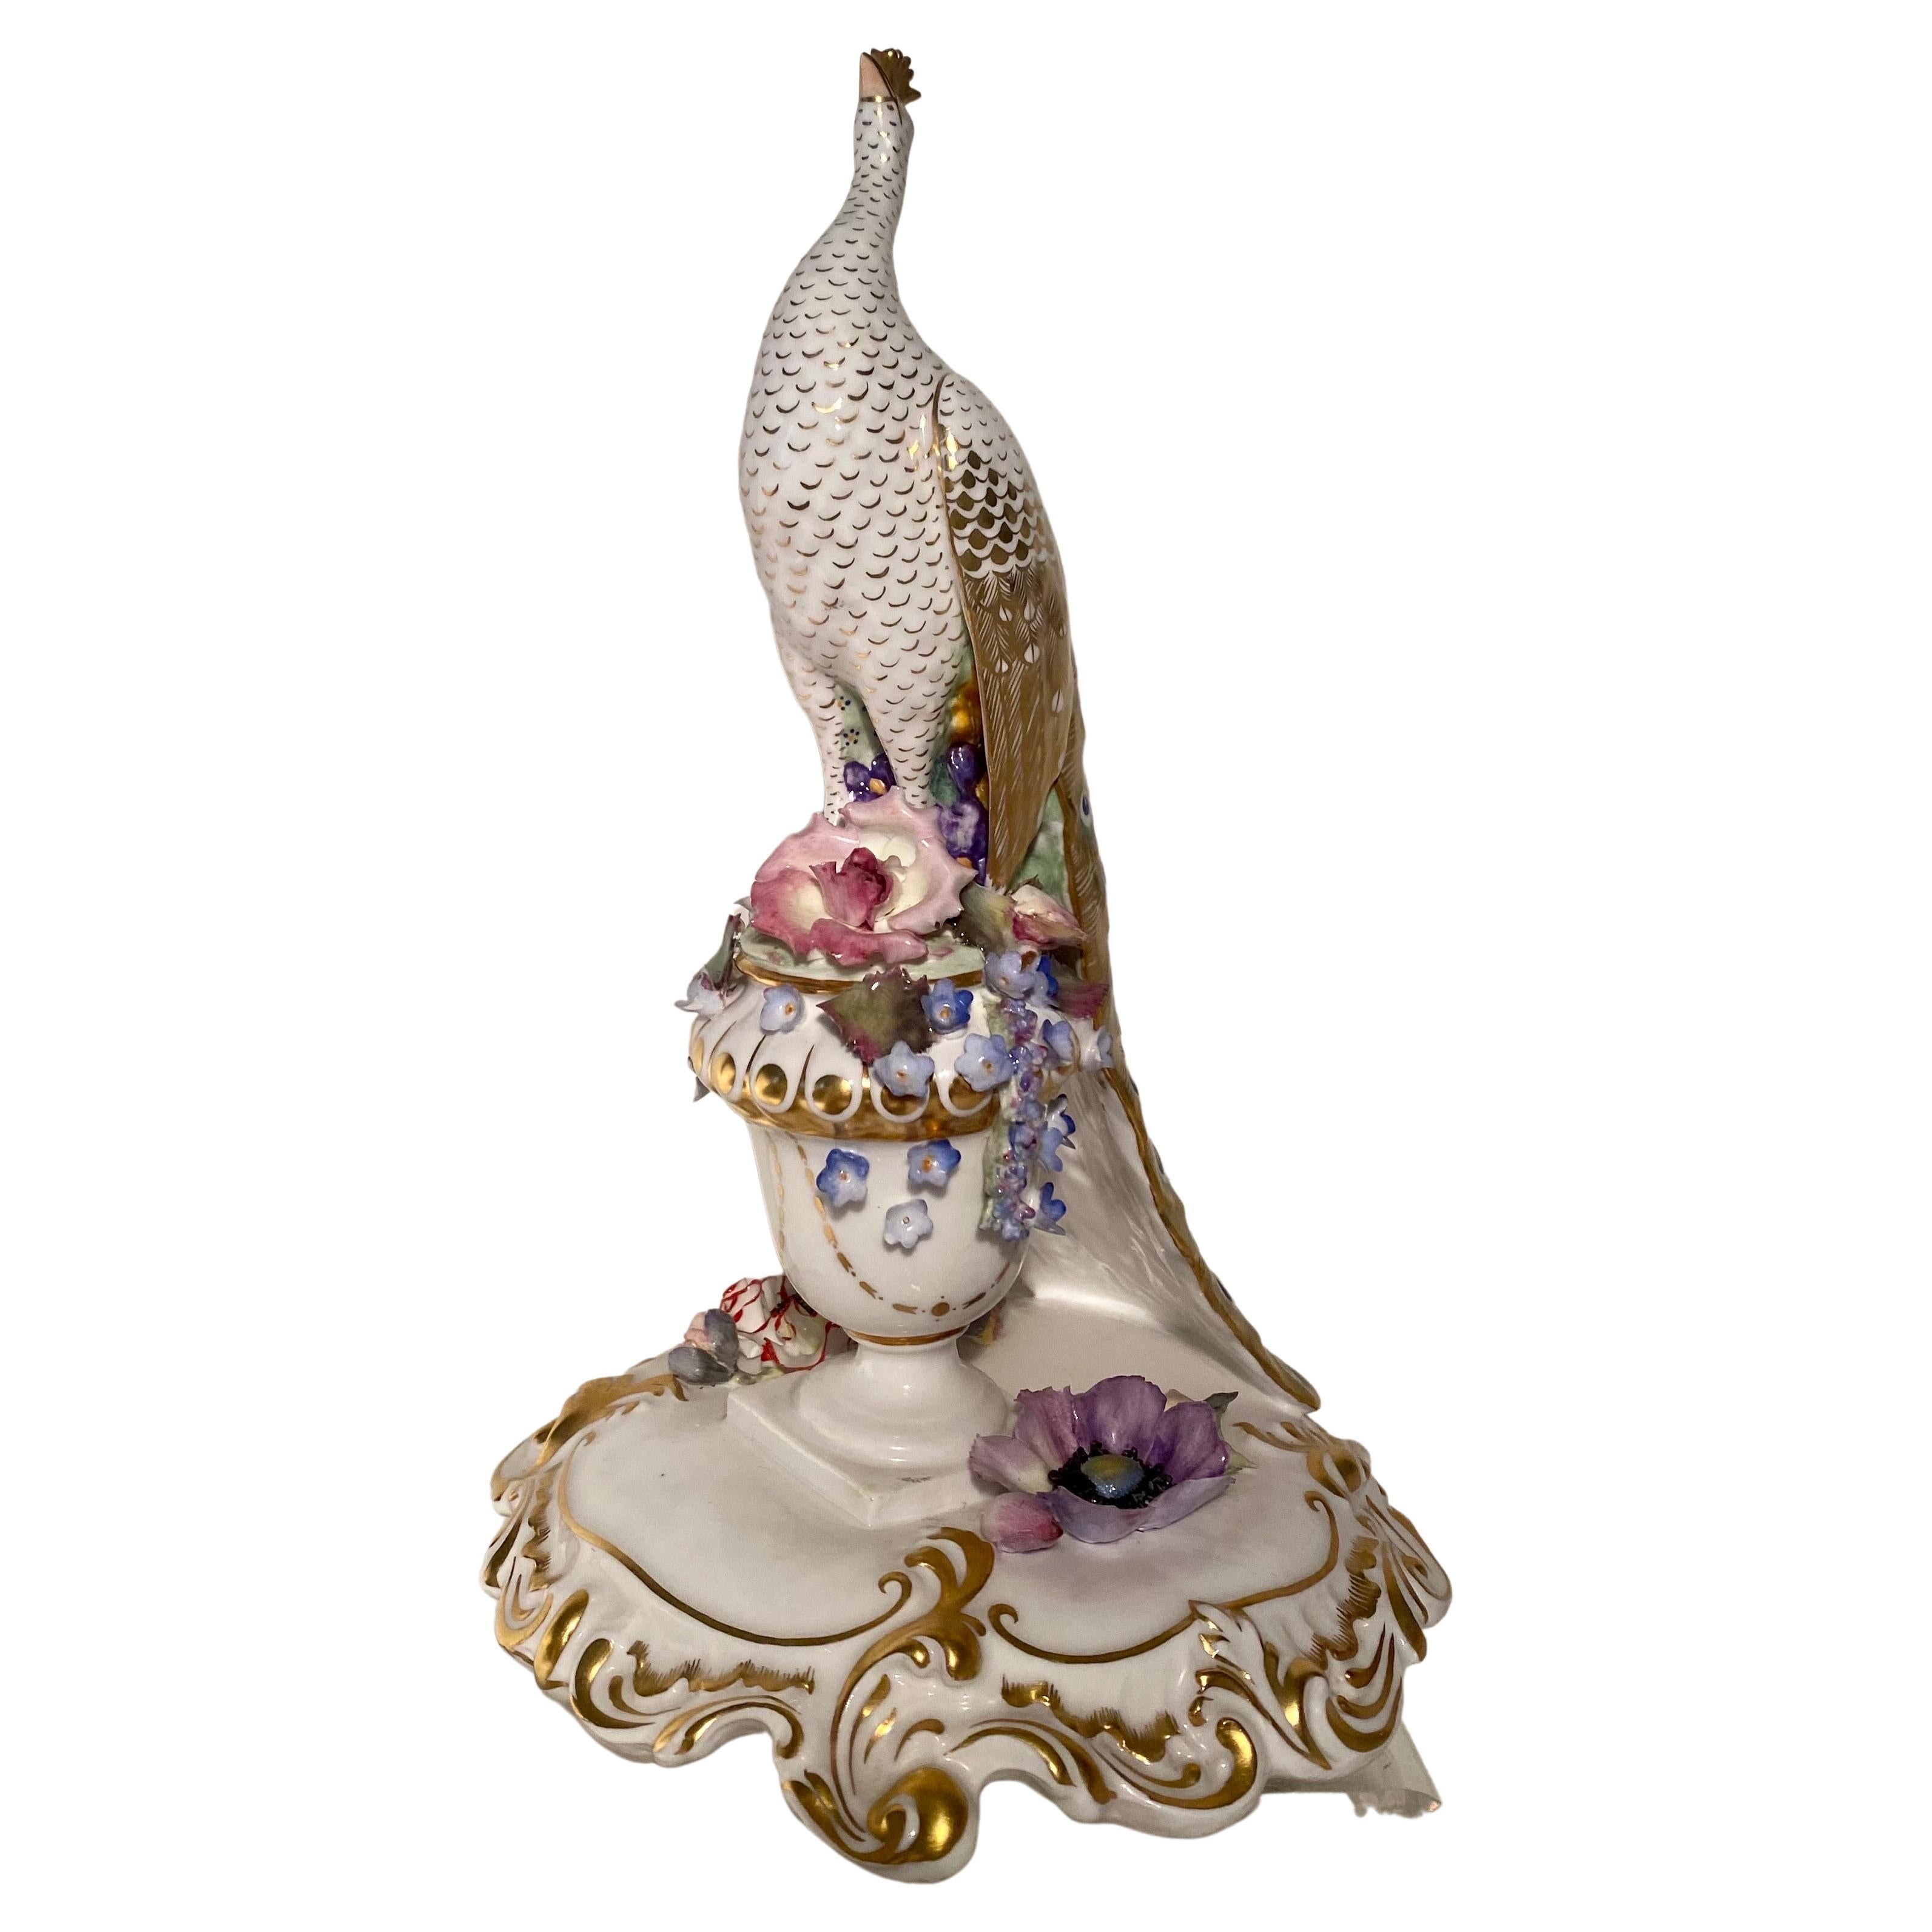 Royal Crown Derby Porcelain Figure, Modelled as a Peacock For Sale 5